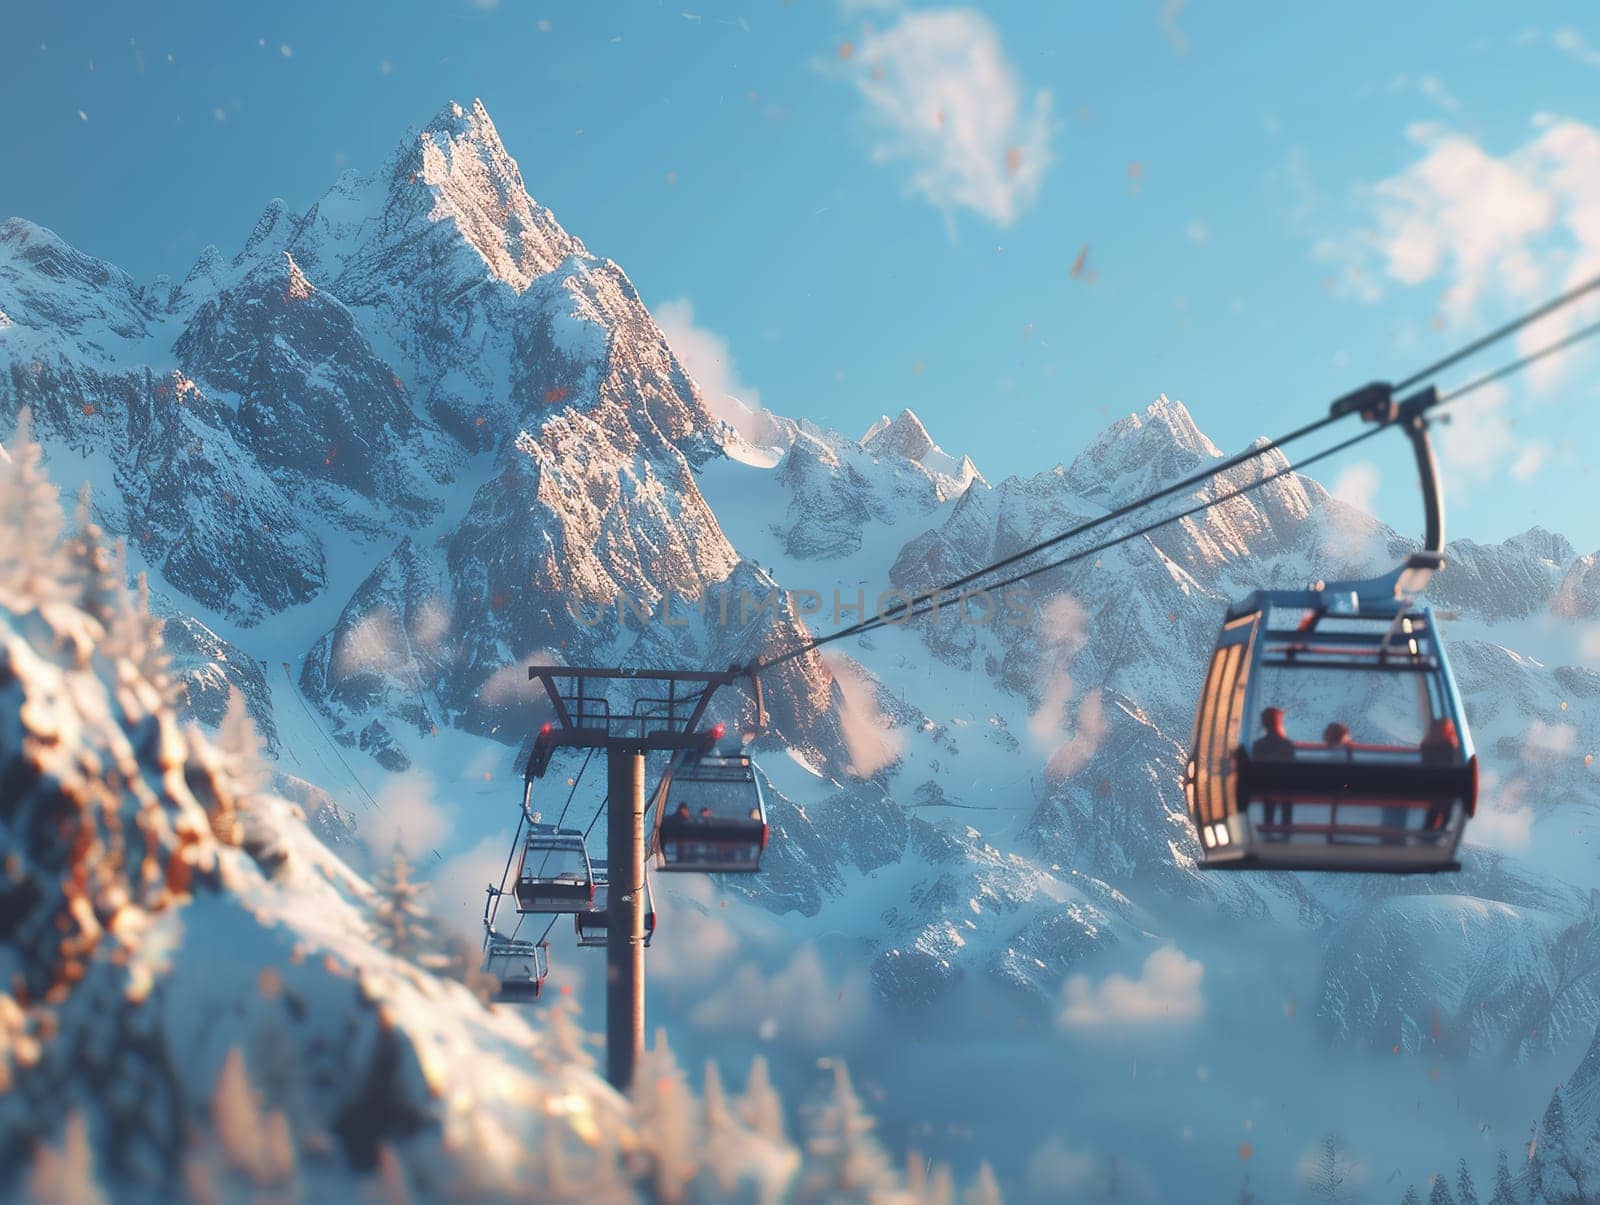 Cable car gondola in front of mountain scenery by Andelov13